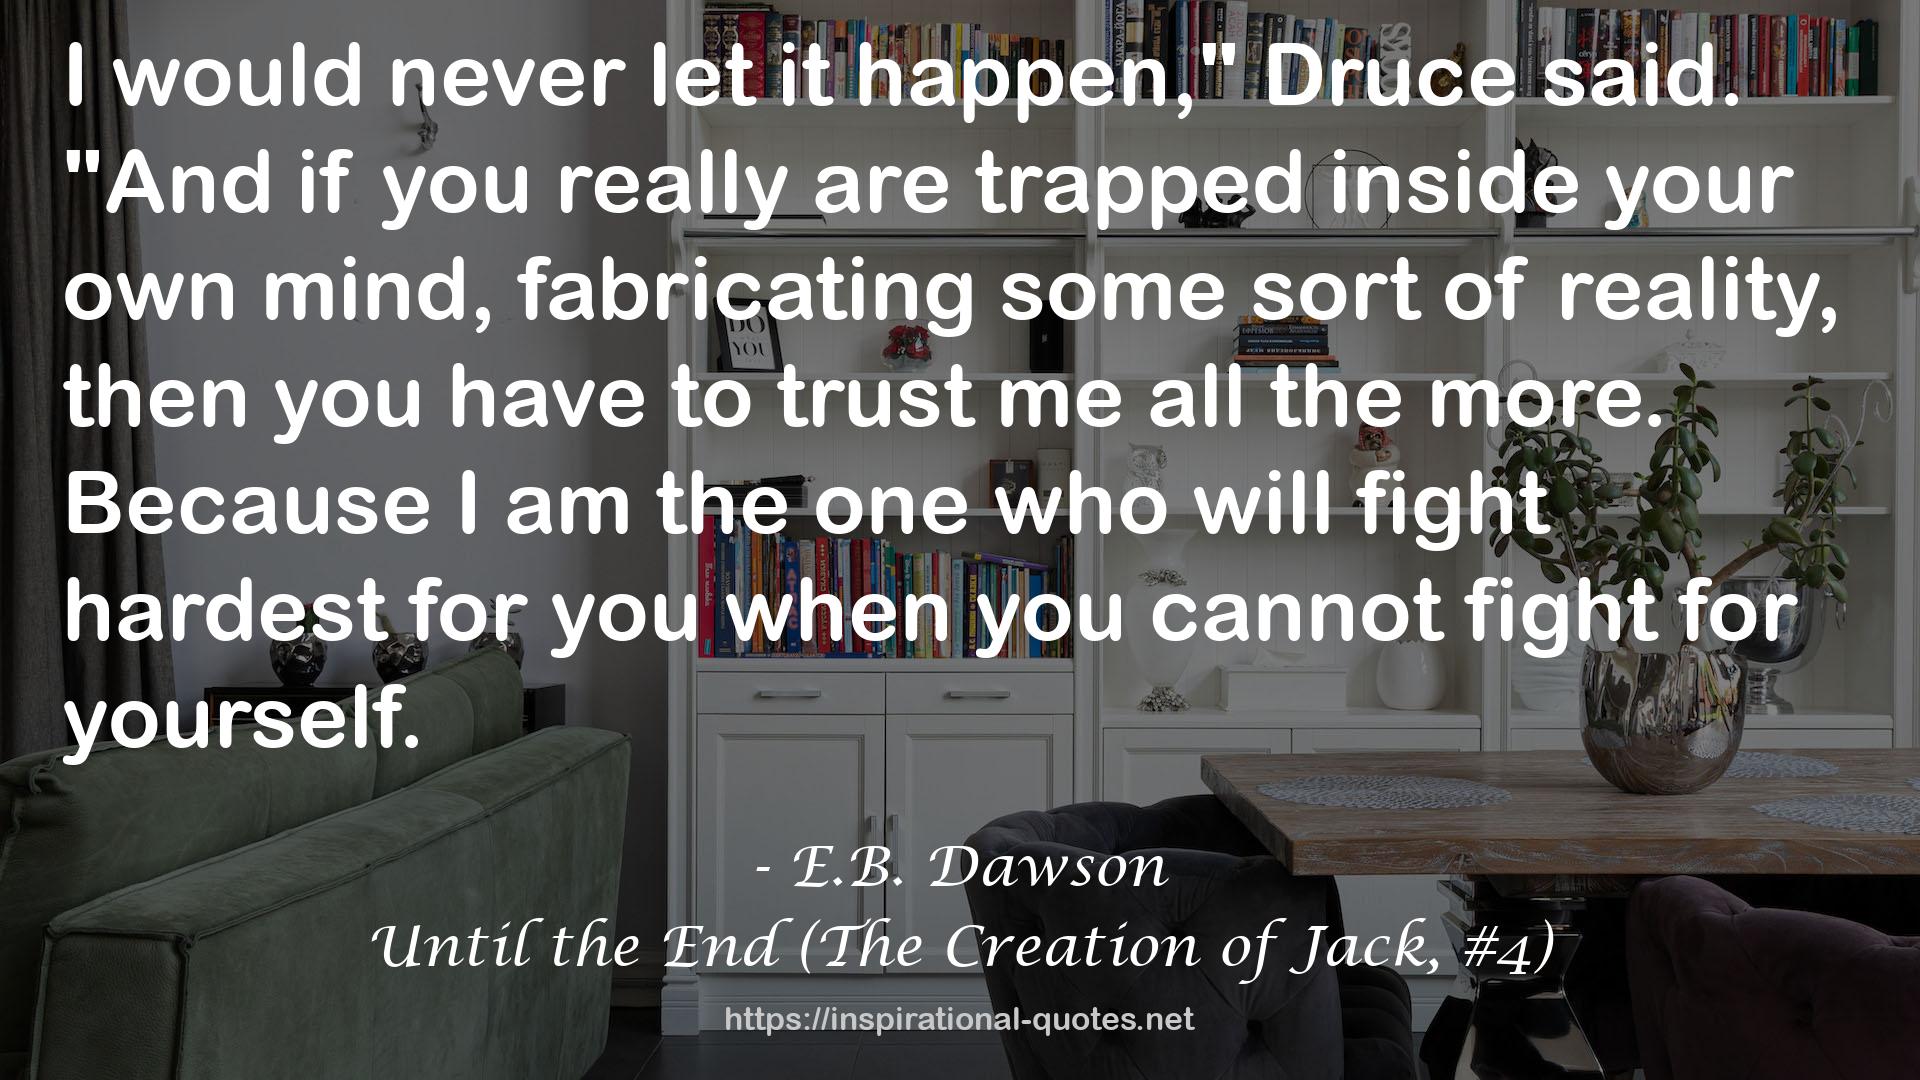 Until the End (The Creation of Jack, #4) QUOTES